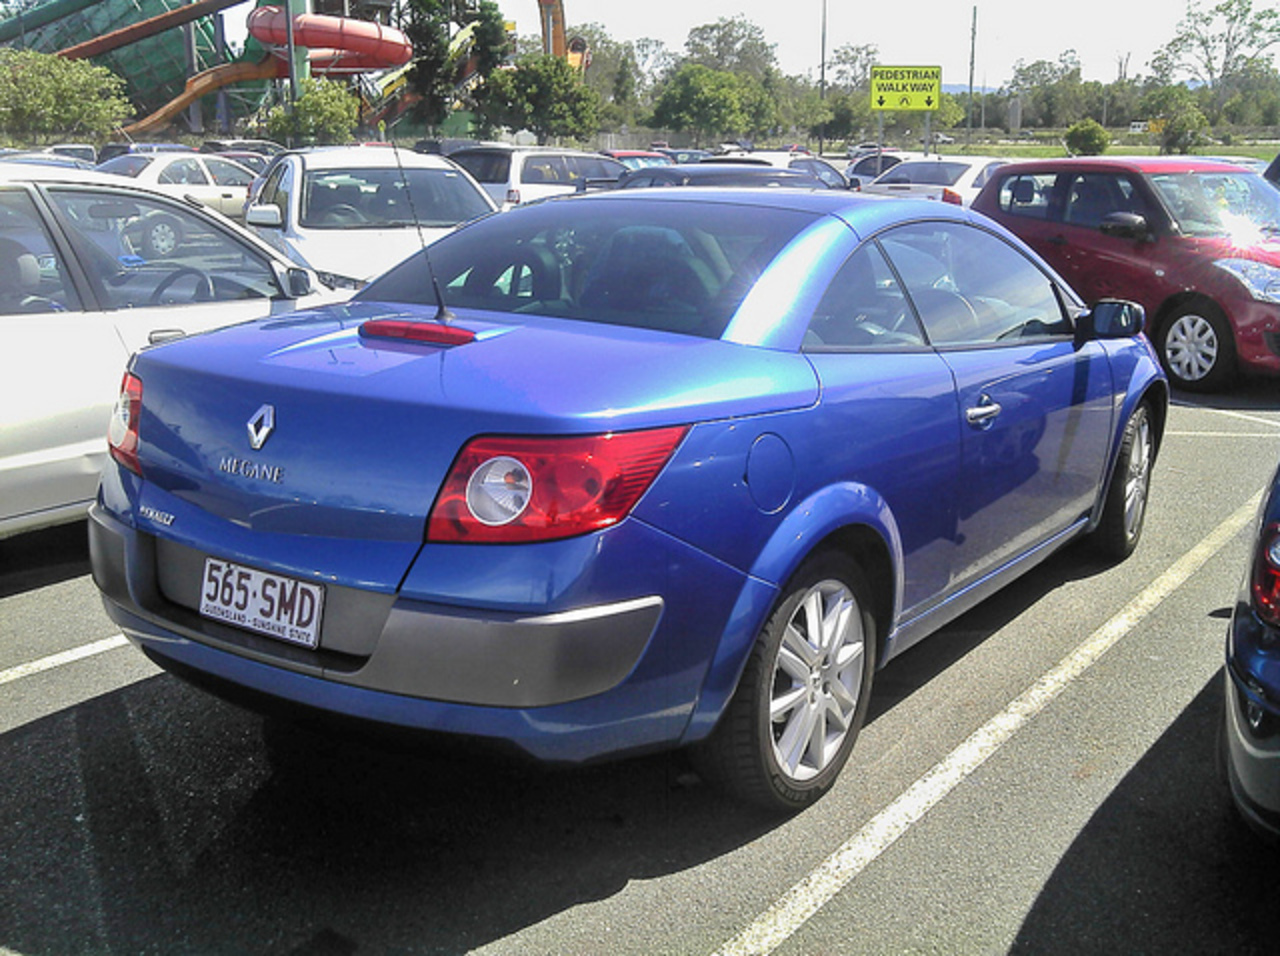 2008 Renault Megane Coupe Convertible | Flickr - Photo Sharing!